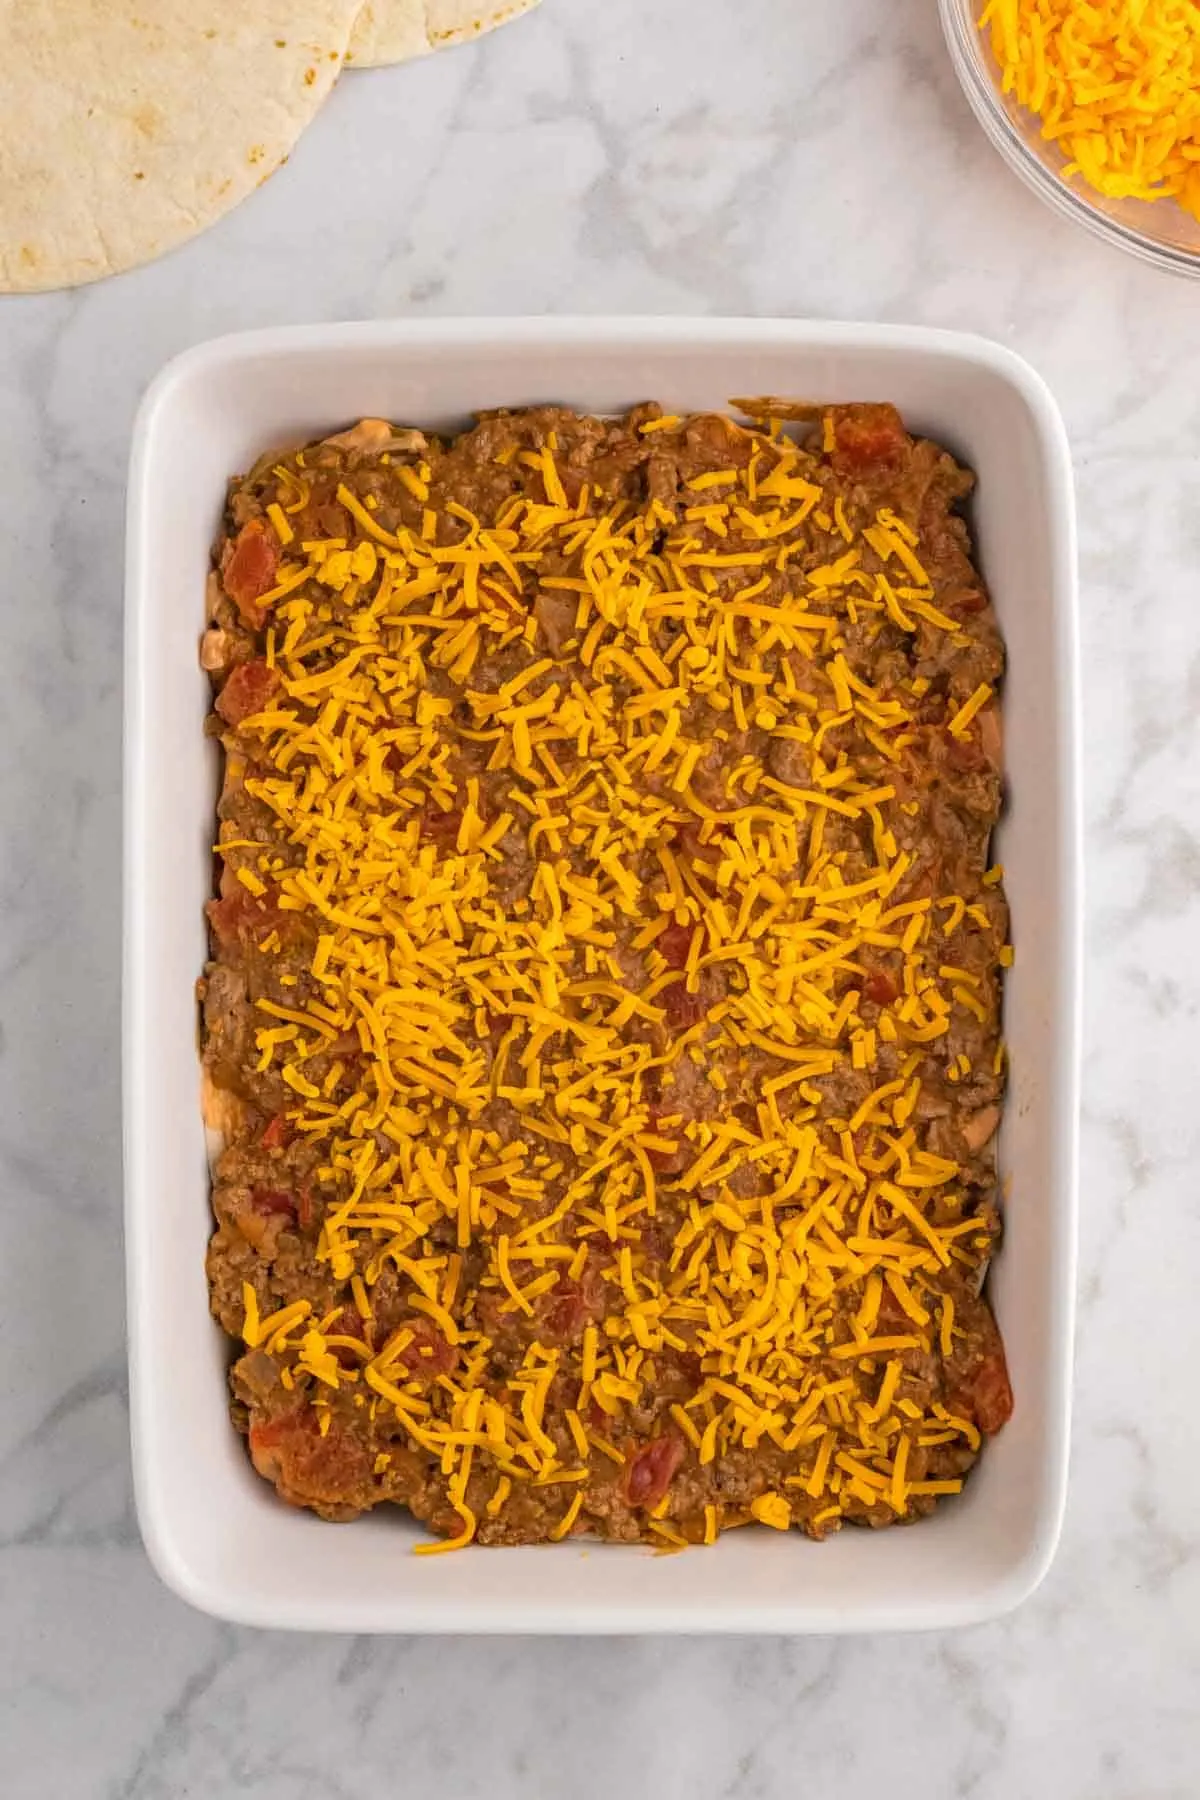 shredded cheddar cheese on top of beef burrito mixture in a baking dish